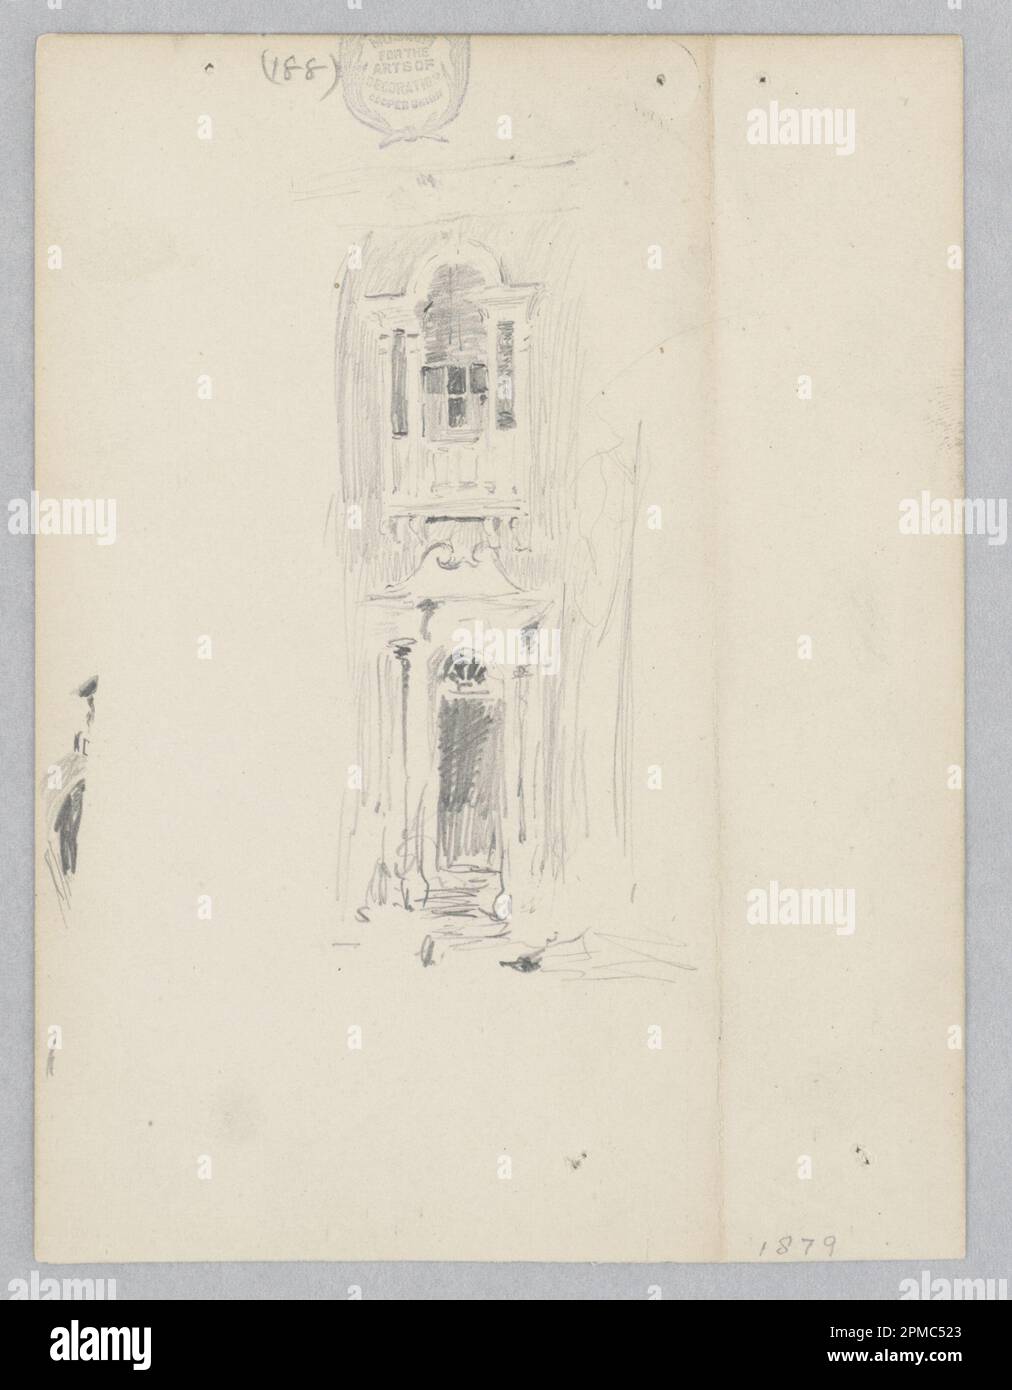 Drawing, Street view; Robert Frederick Blum (American, 1857–1903); USA; graphite on wove paper; 14.8 × 11.2 cm (5 13/16 × 4 7/16 in.) Stock Photo